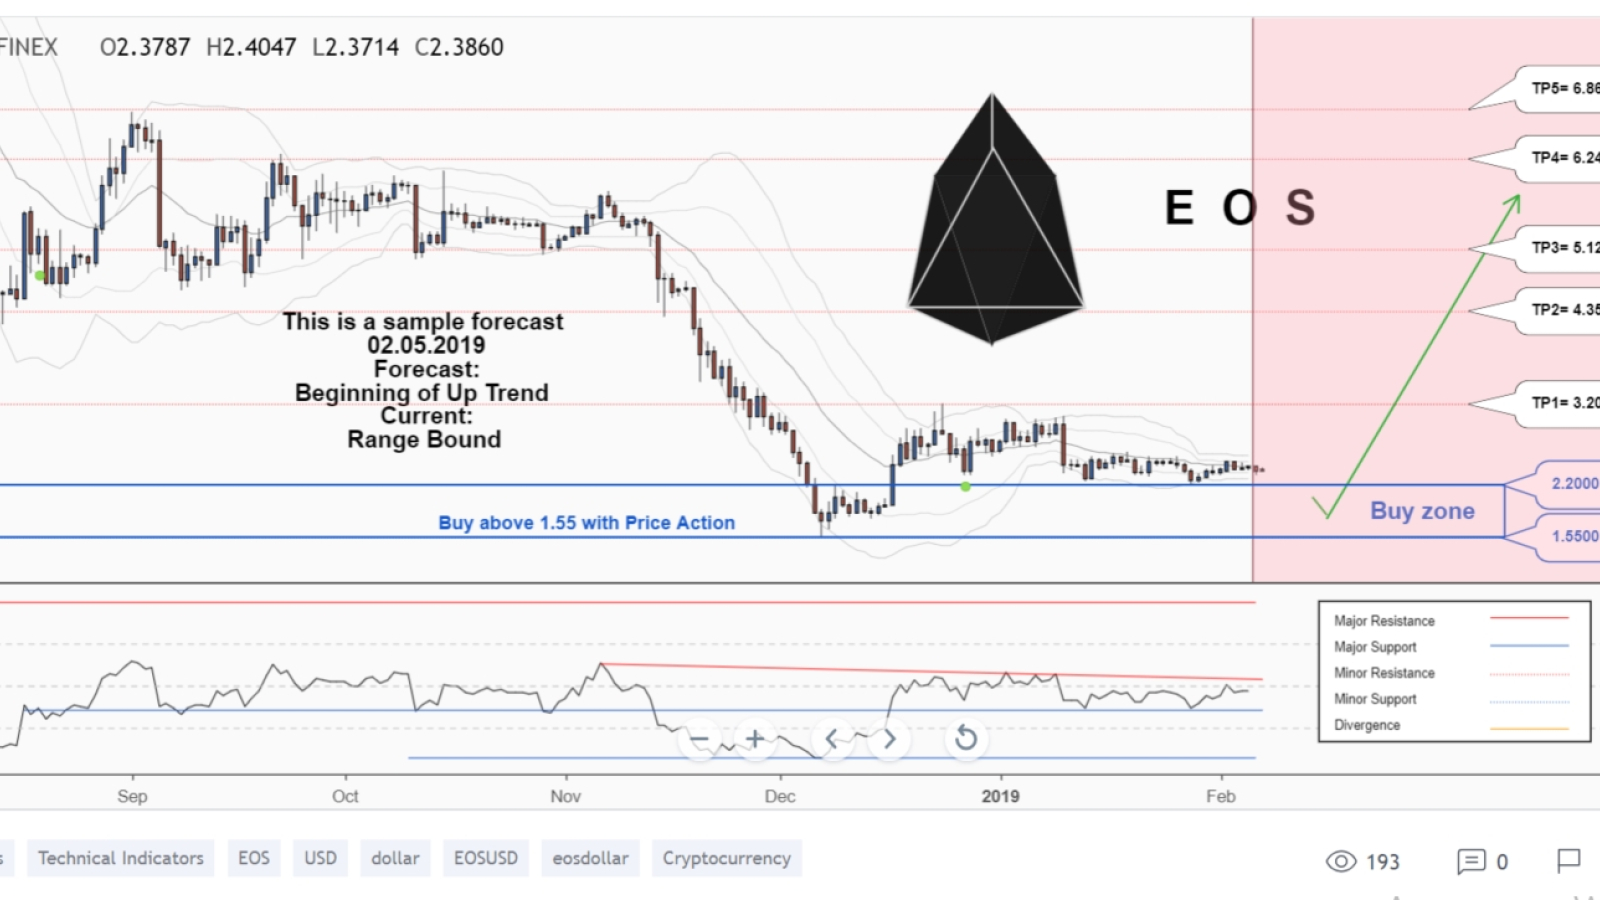 EOS 2019 Price Prediction: It Starts Gaining Momentum To Reach $6 By April